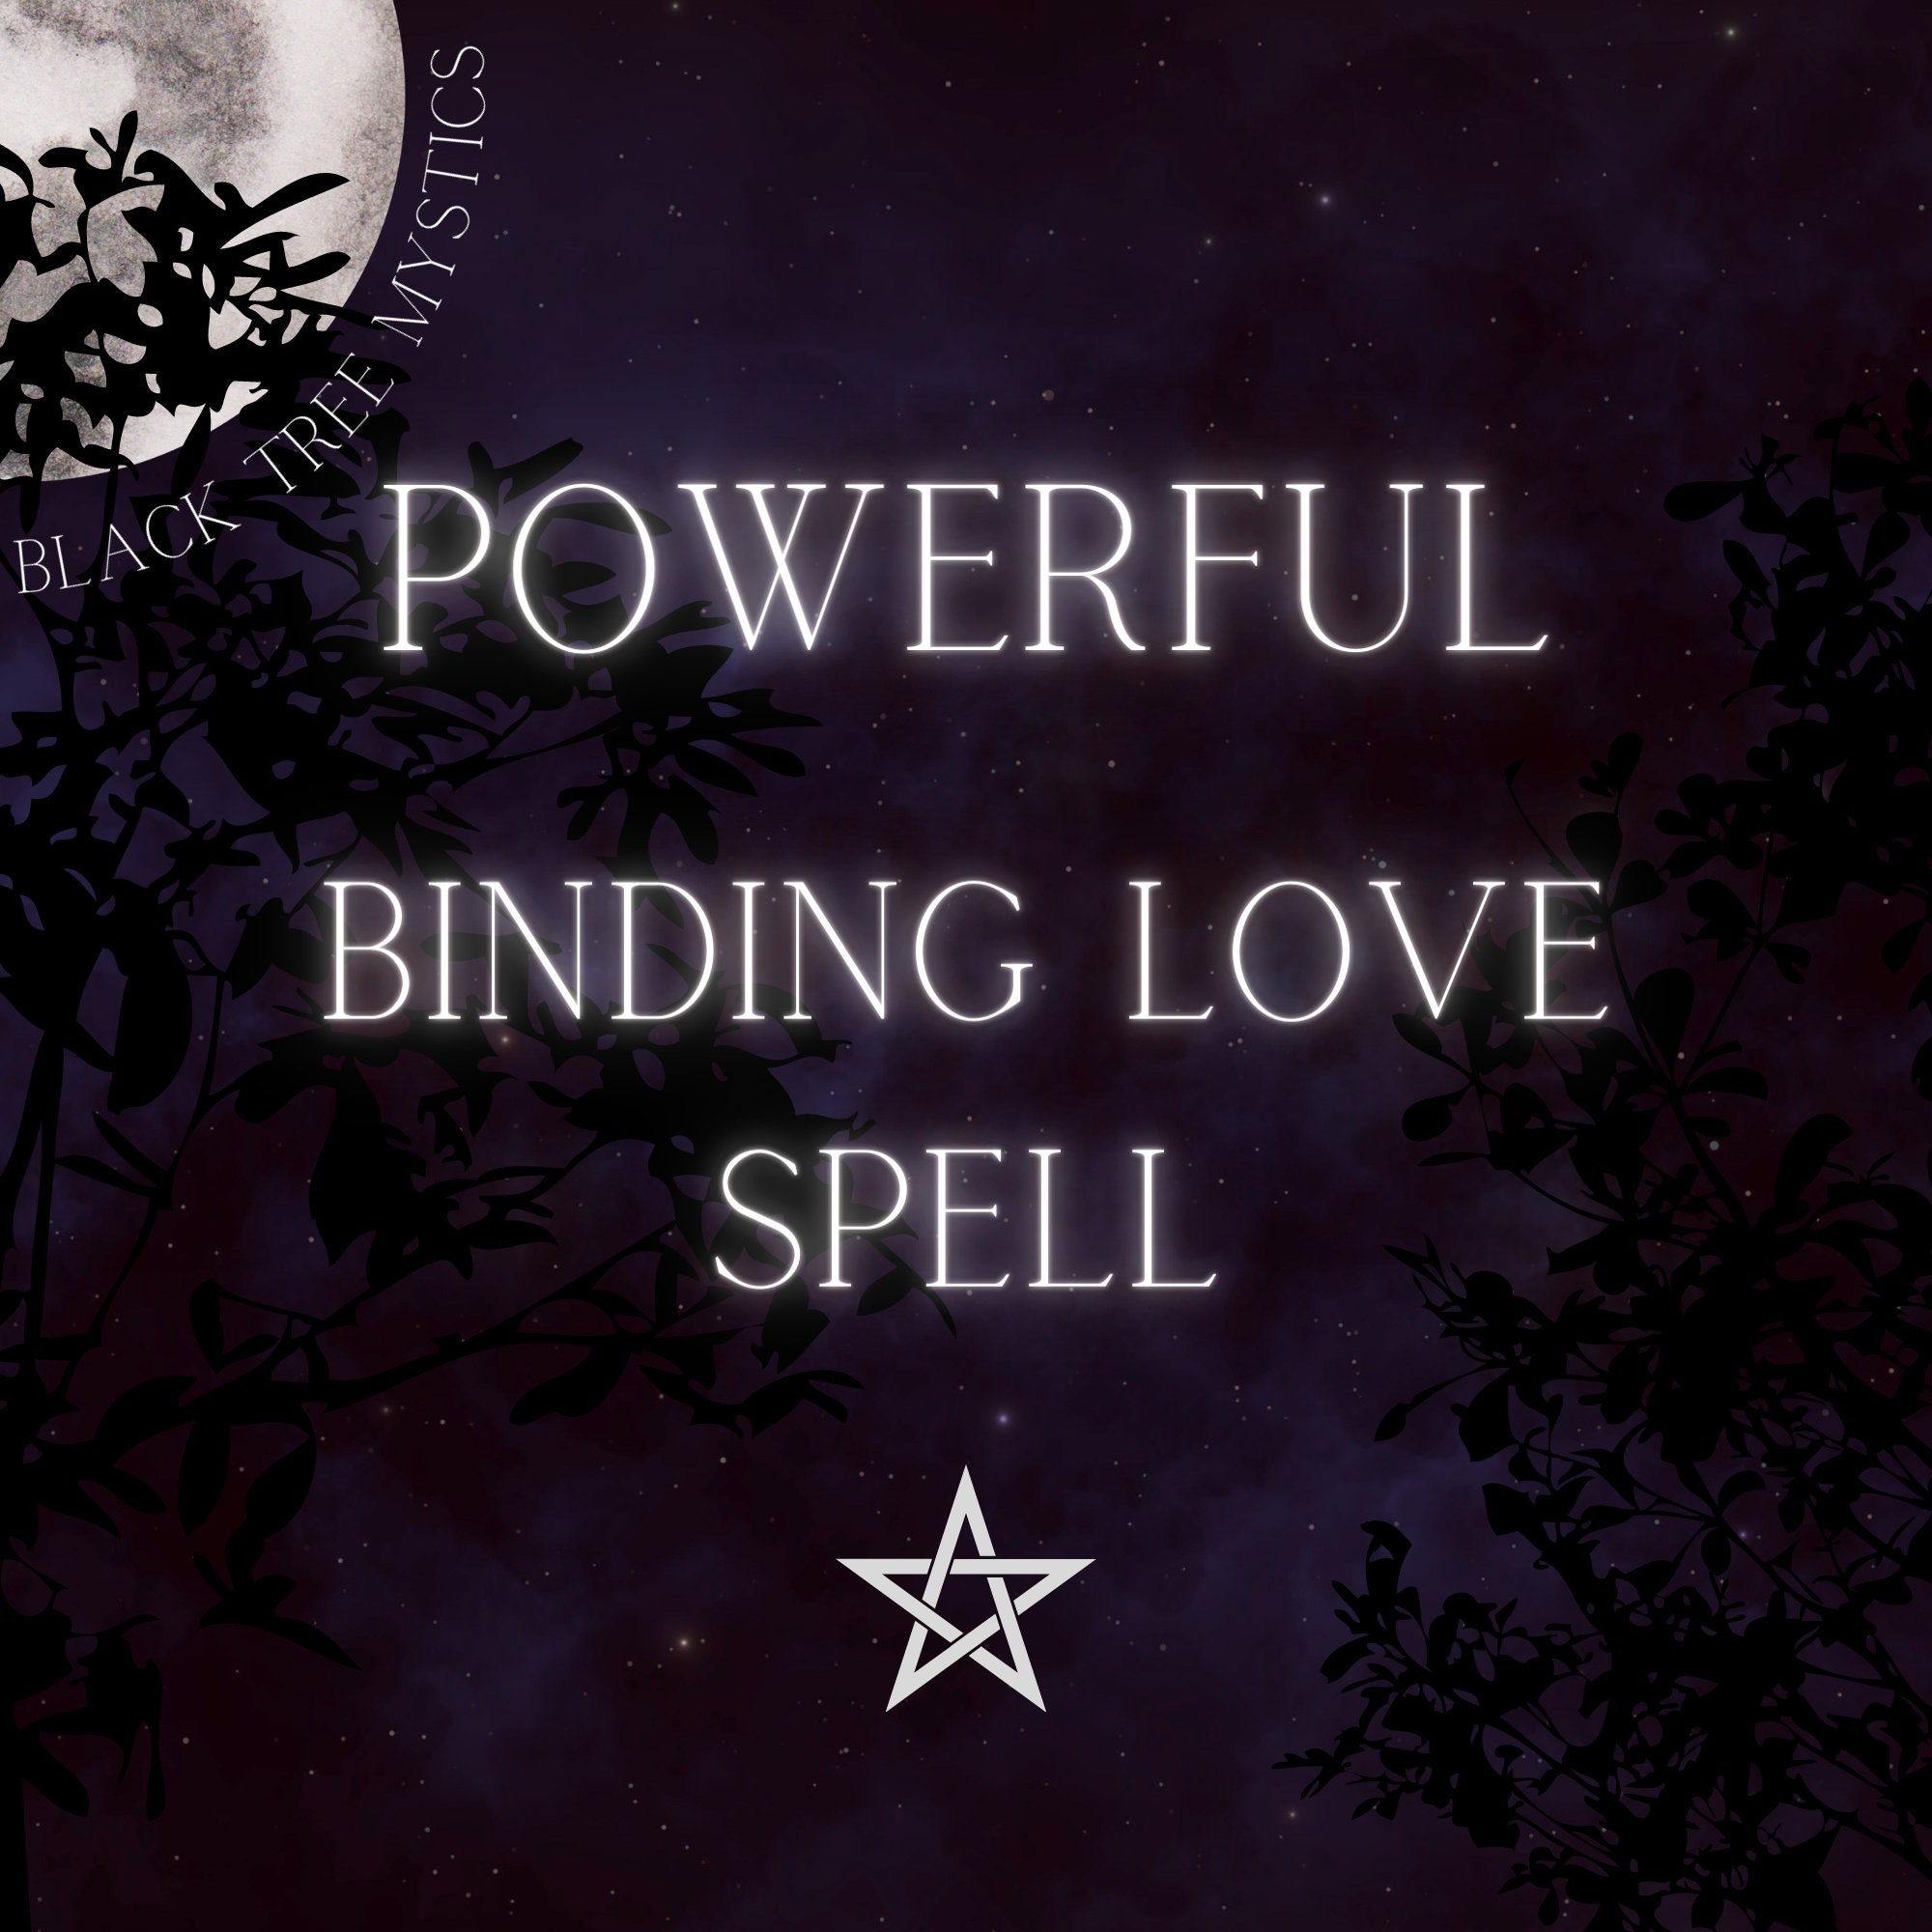 Collection 102+ Images love binding spell using photos Superb